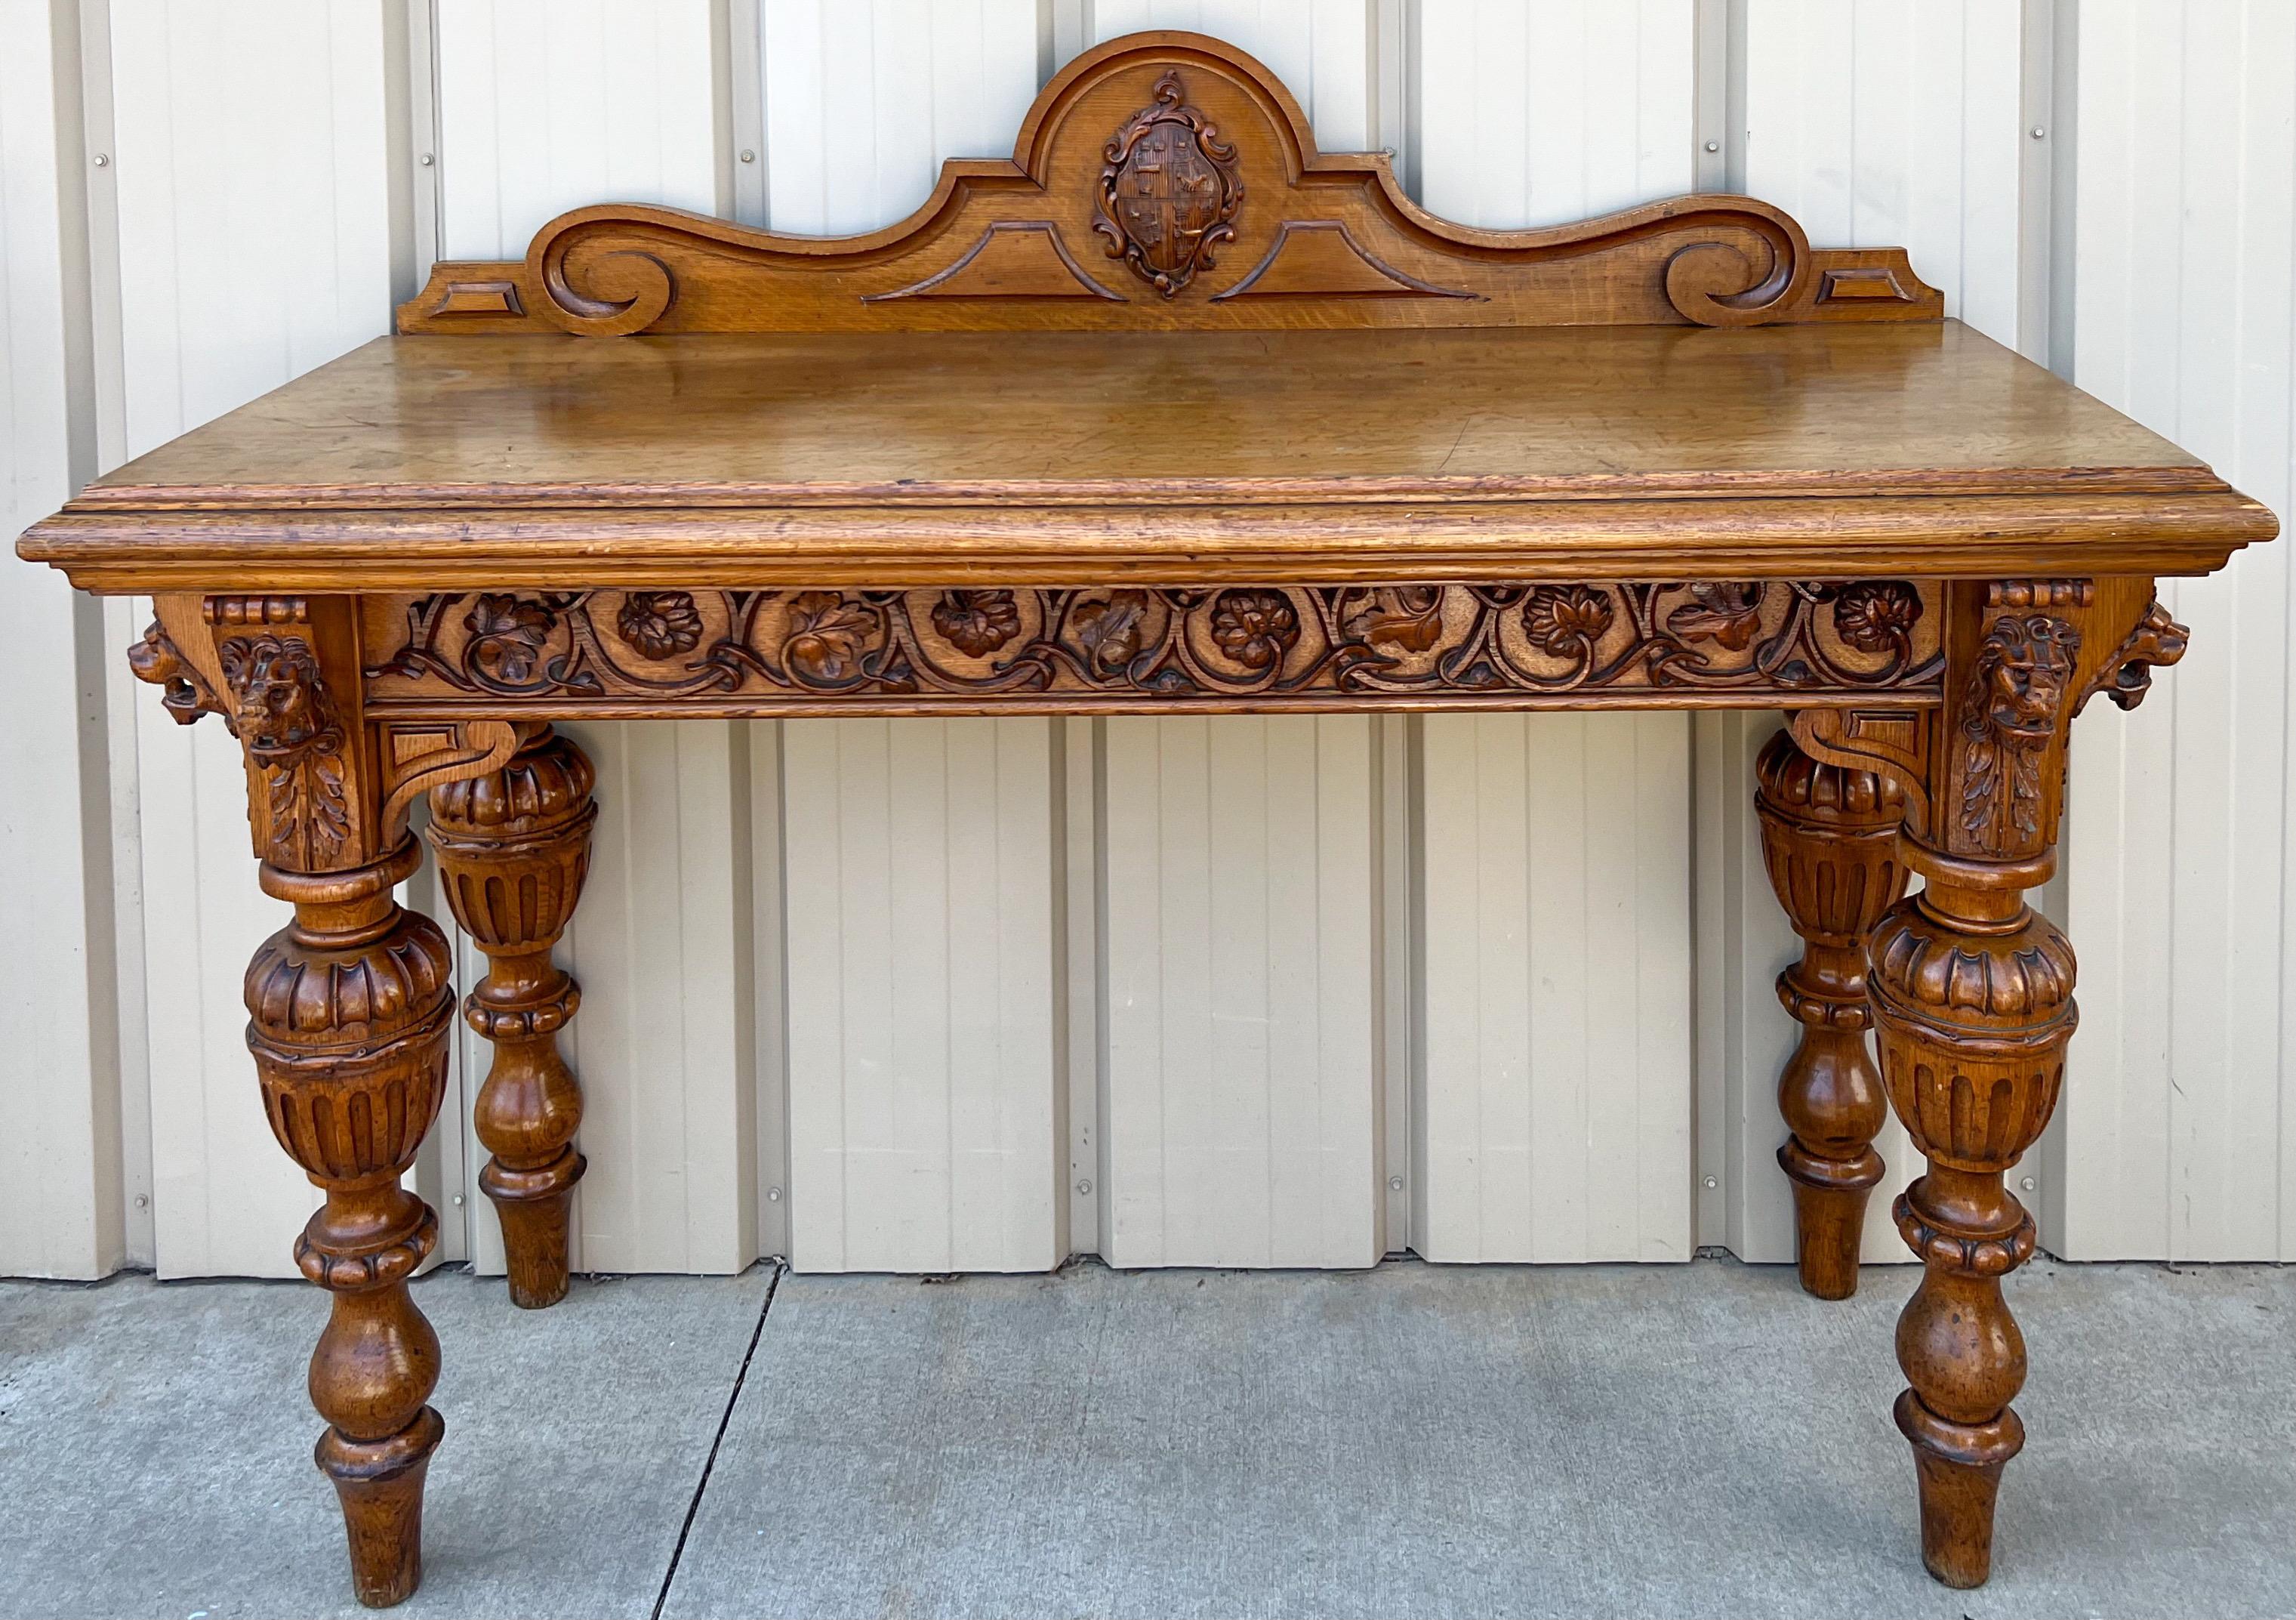 20th Century Early 20th-C. British Colonial Heavily Carved Oak Sideboard  / Server For Sale